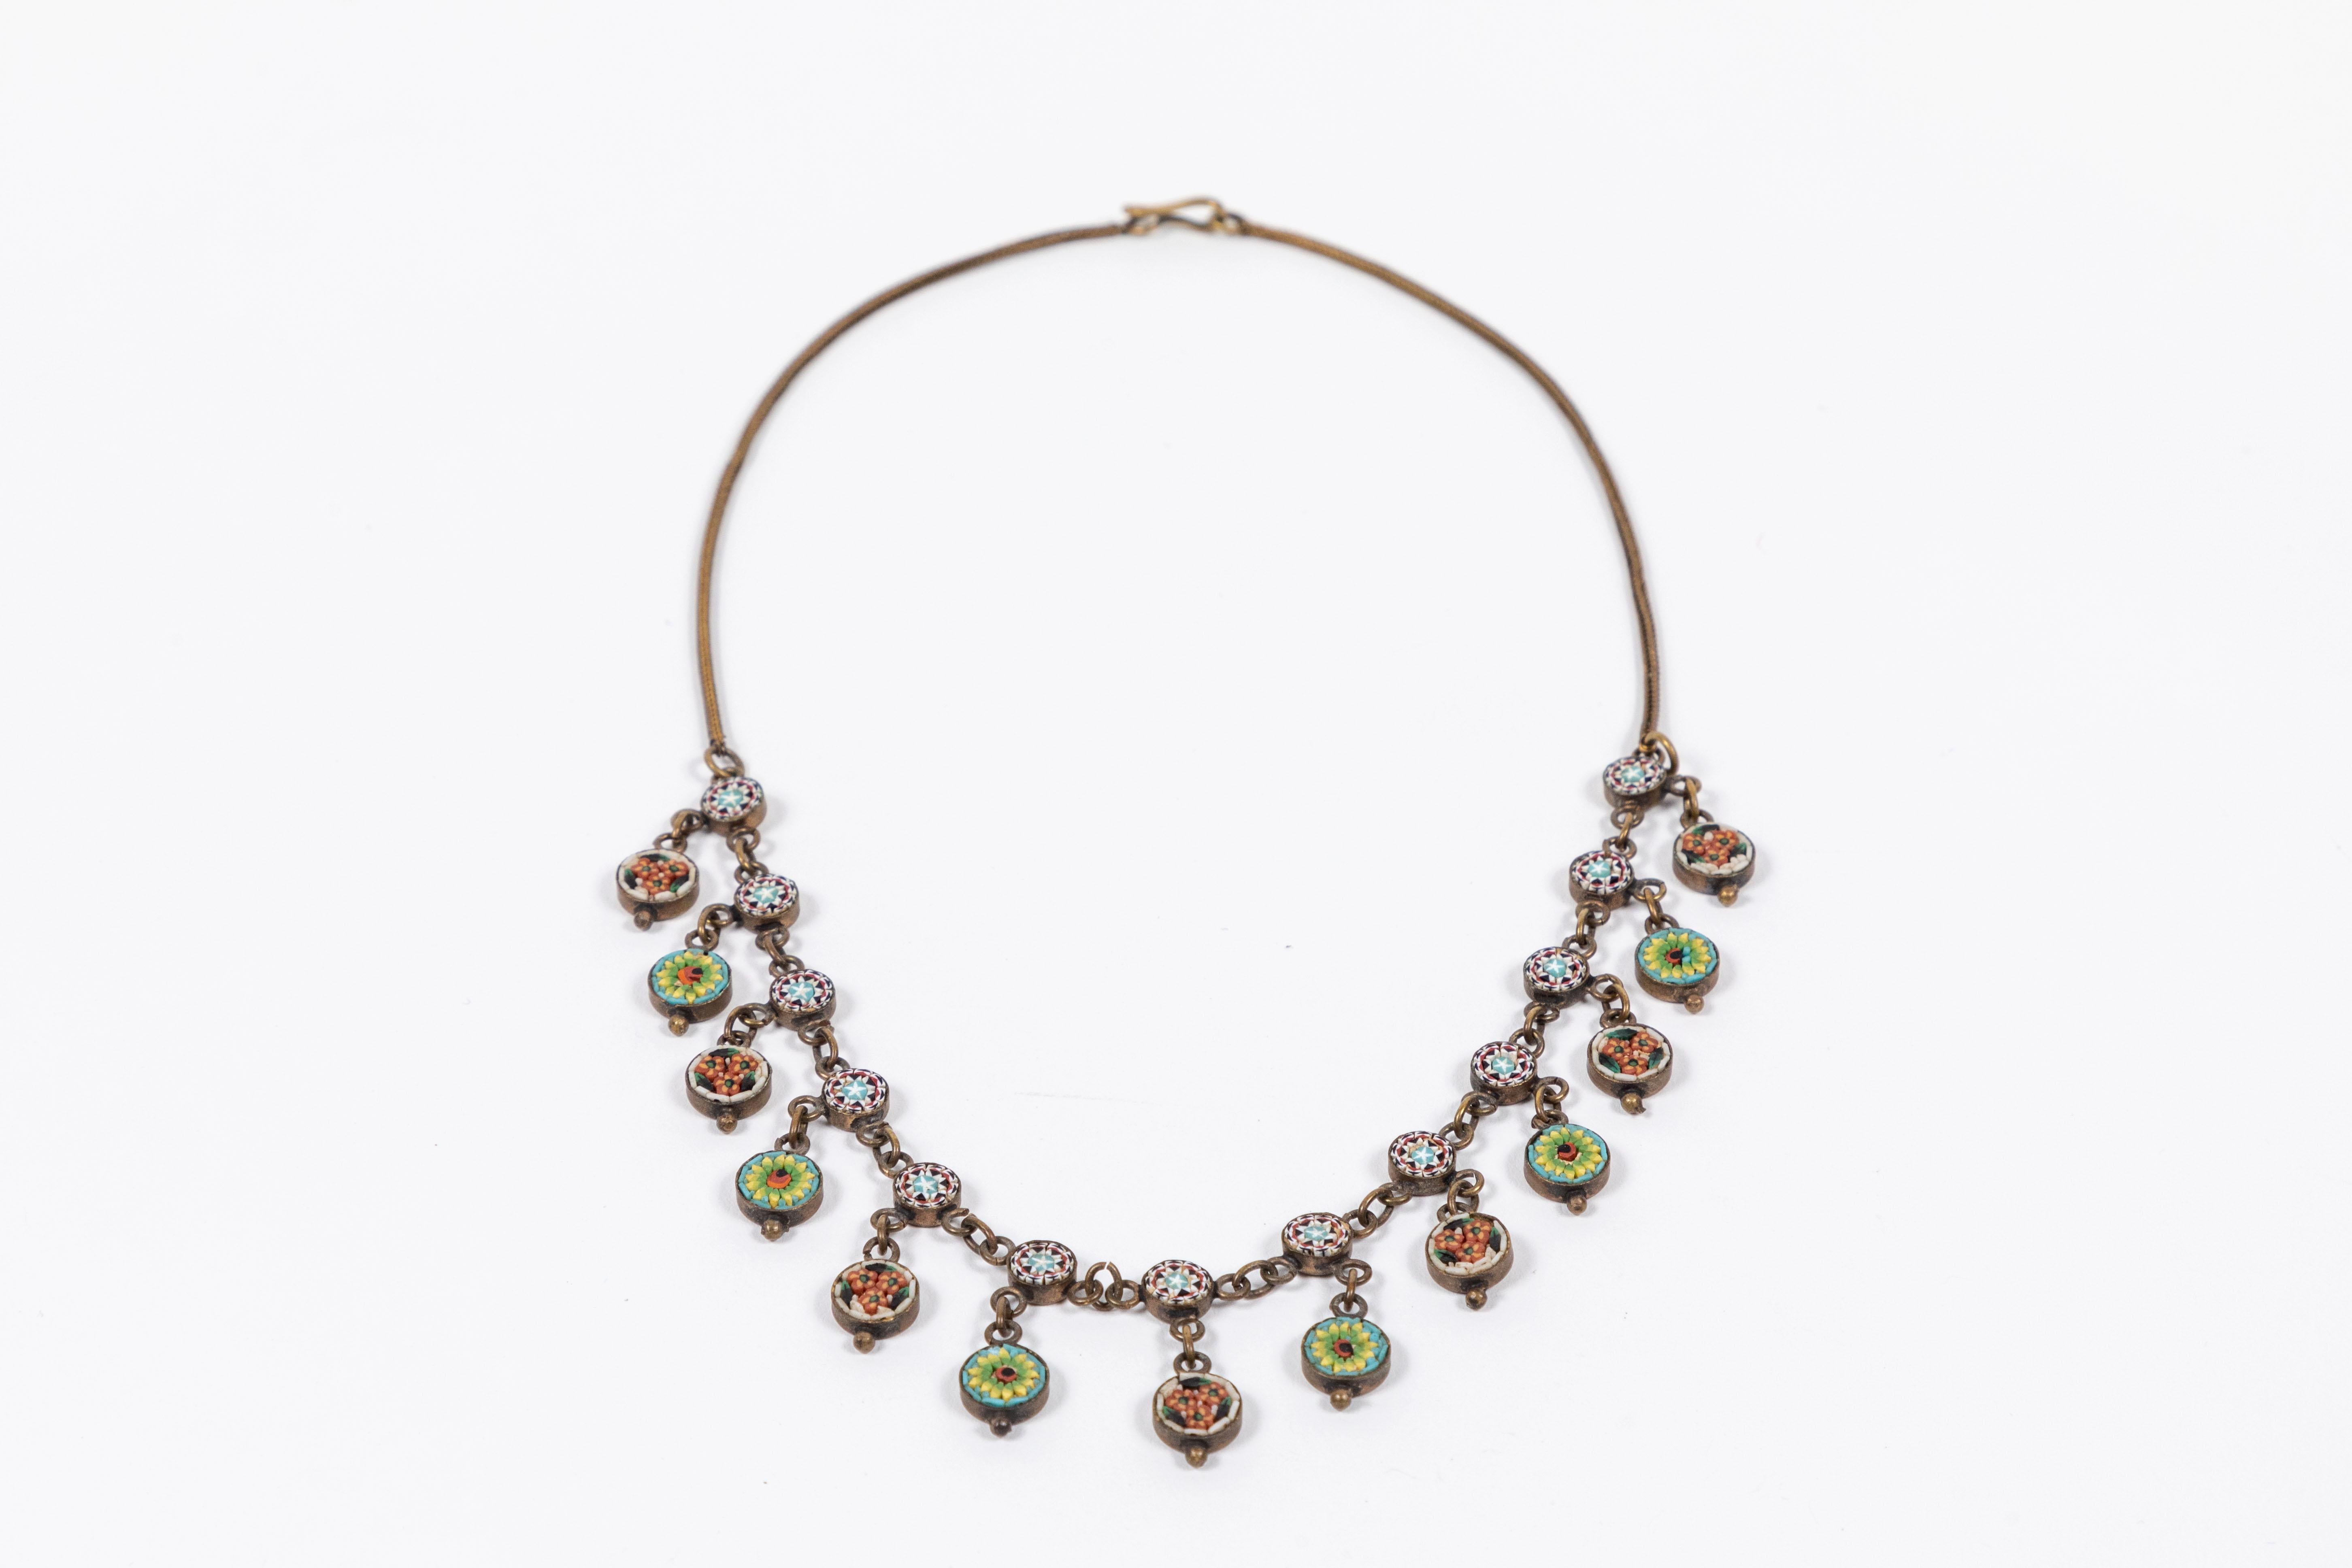 Women's Antique Micro Mosaic Necklace, circa Late 1800s, Italy